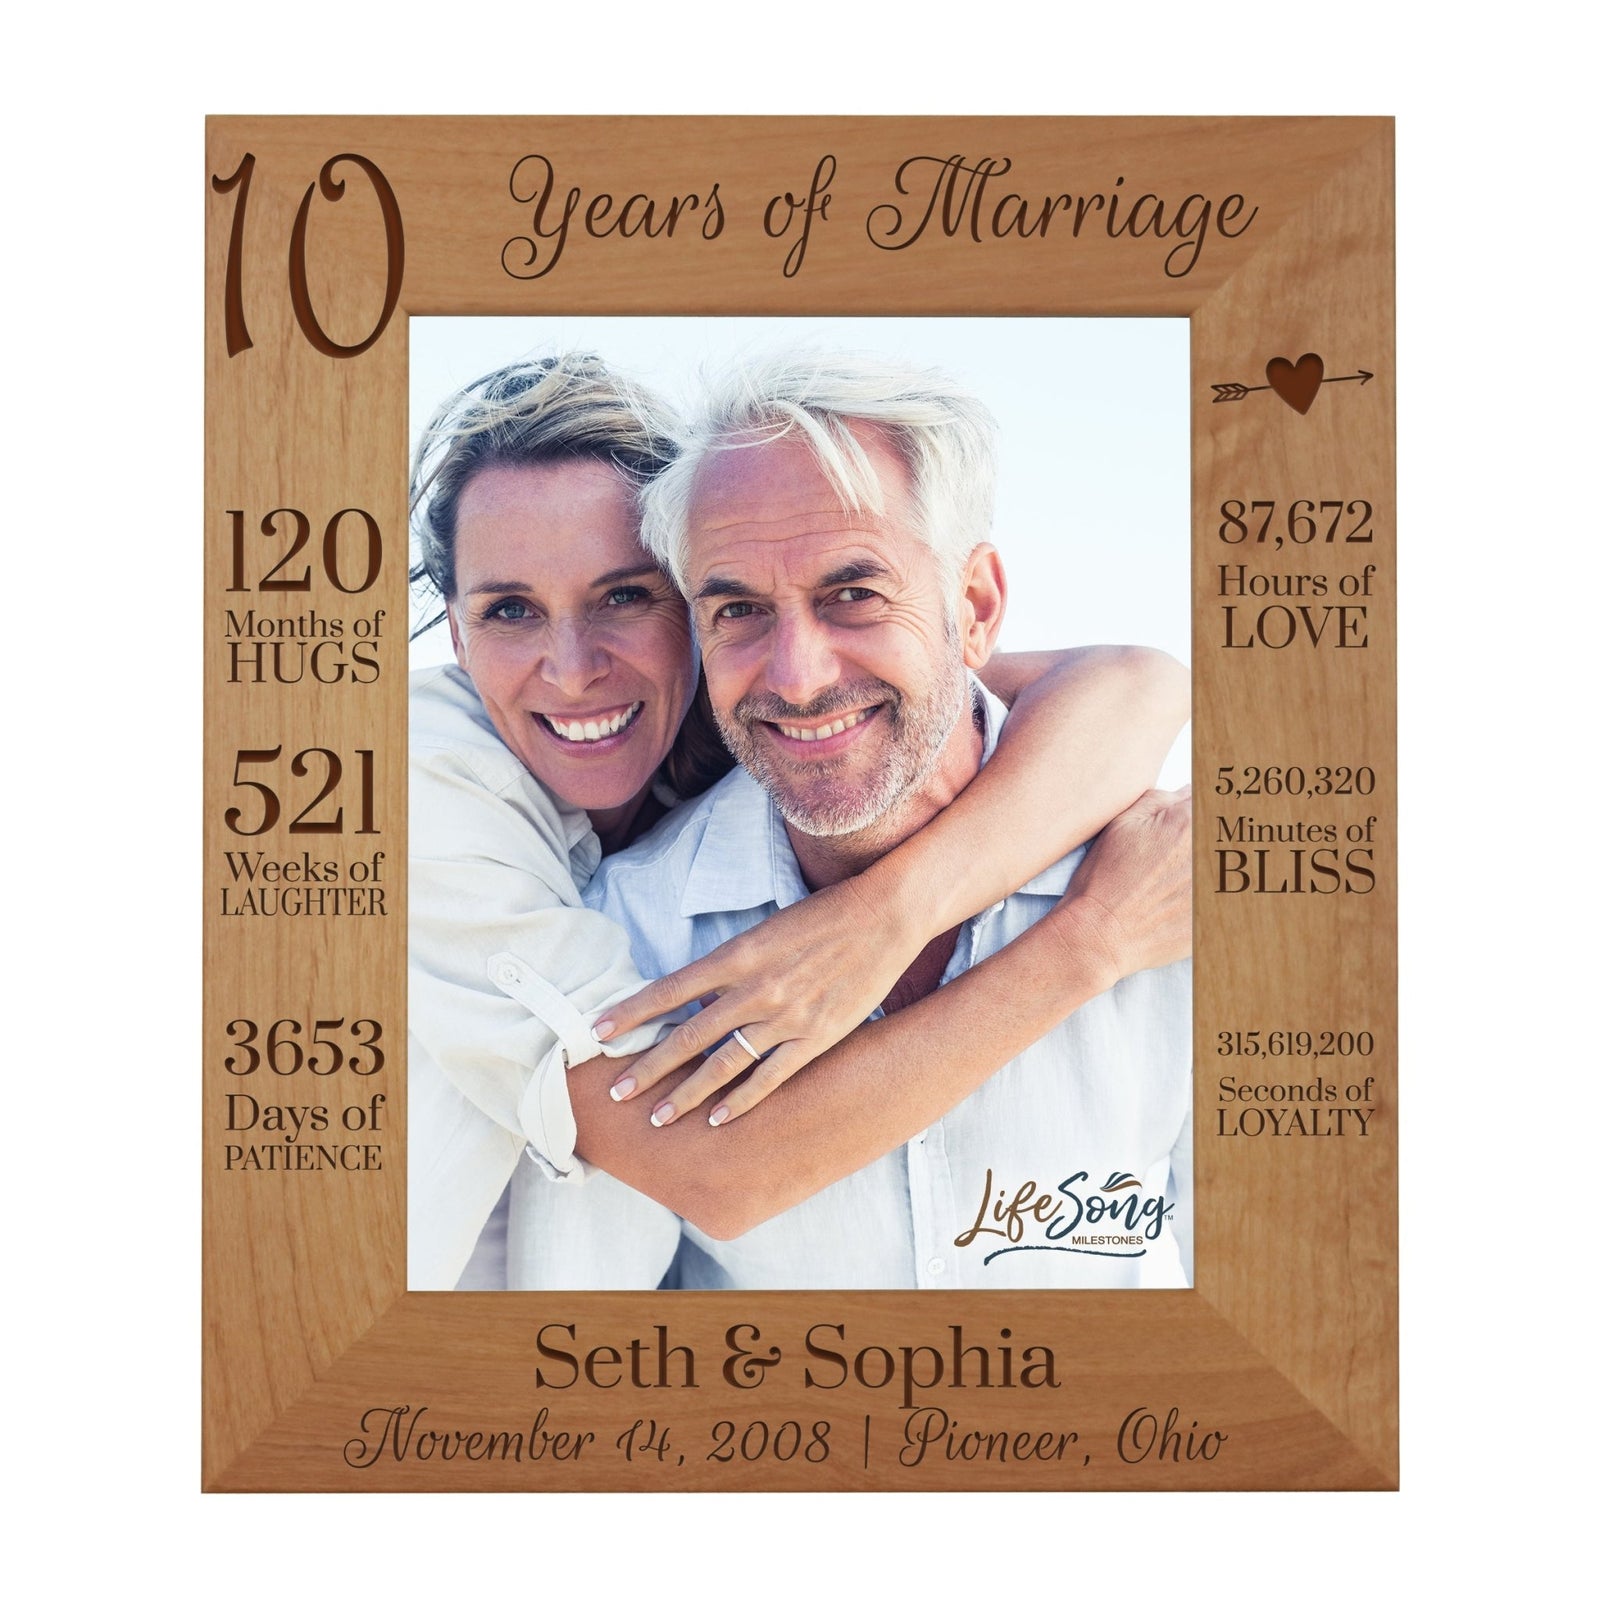 Personalized Couples 10th Wedding Anniversary Photo Frame Home Decor Gift Ideas